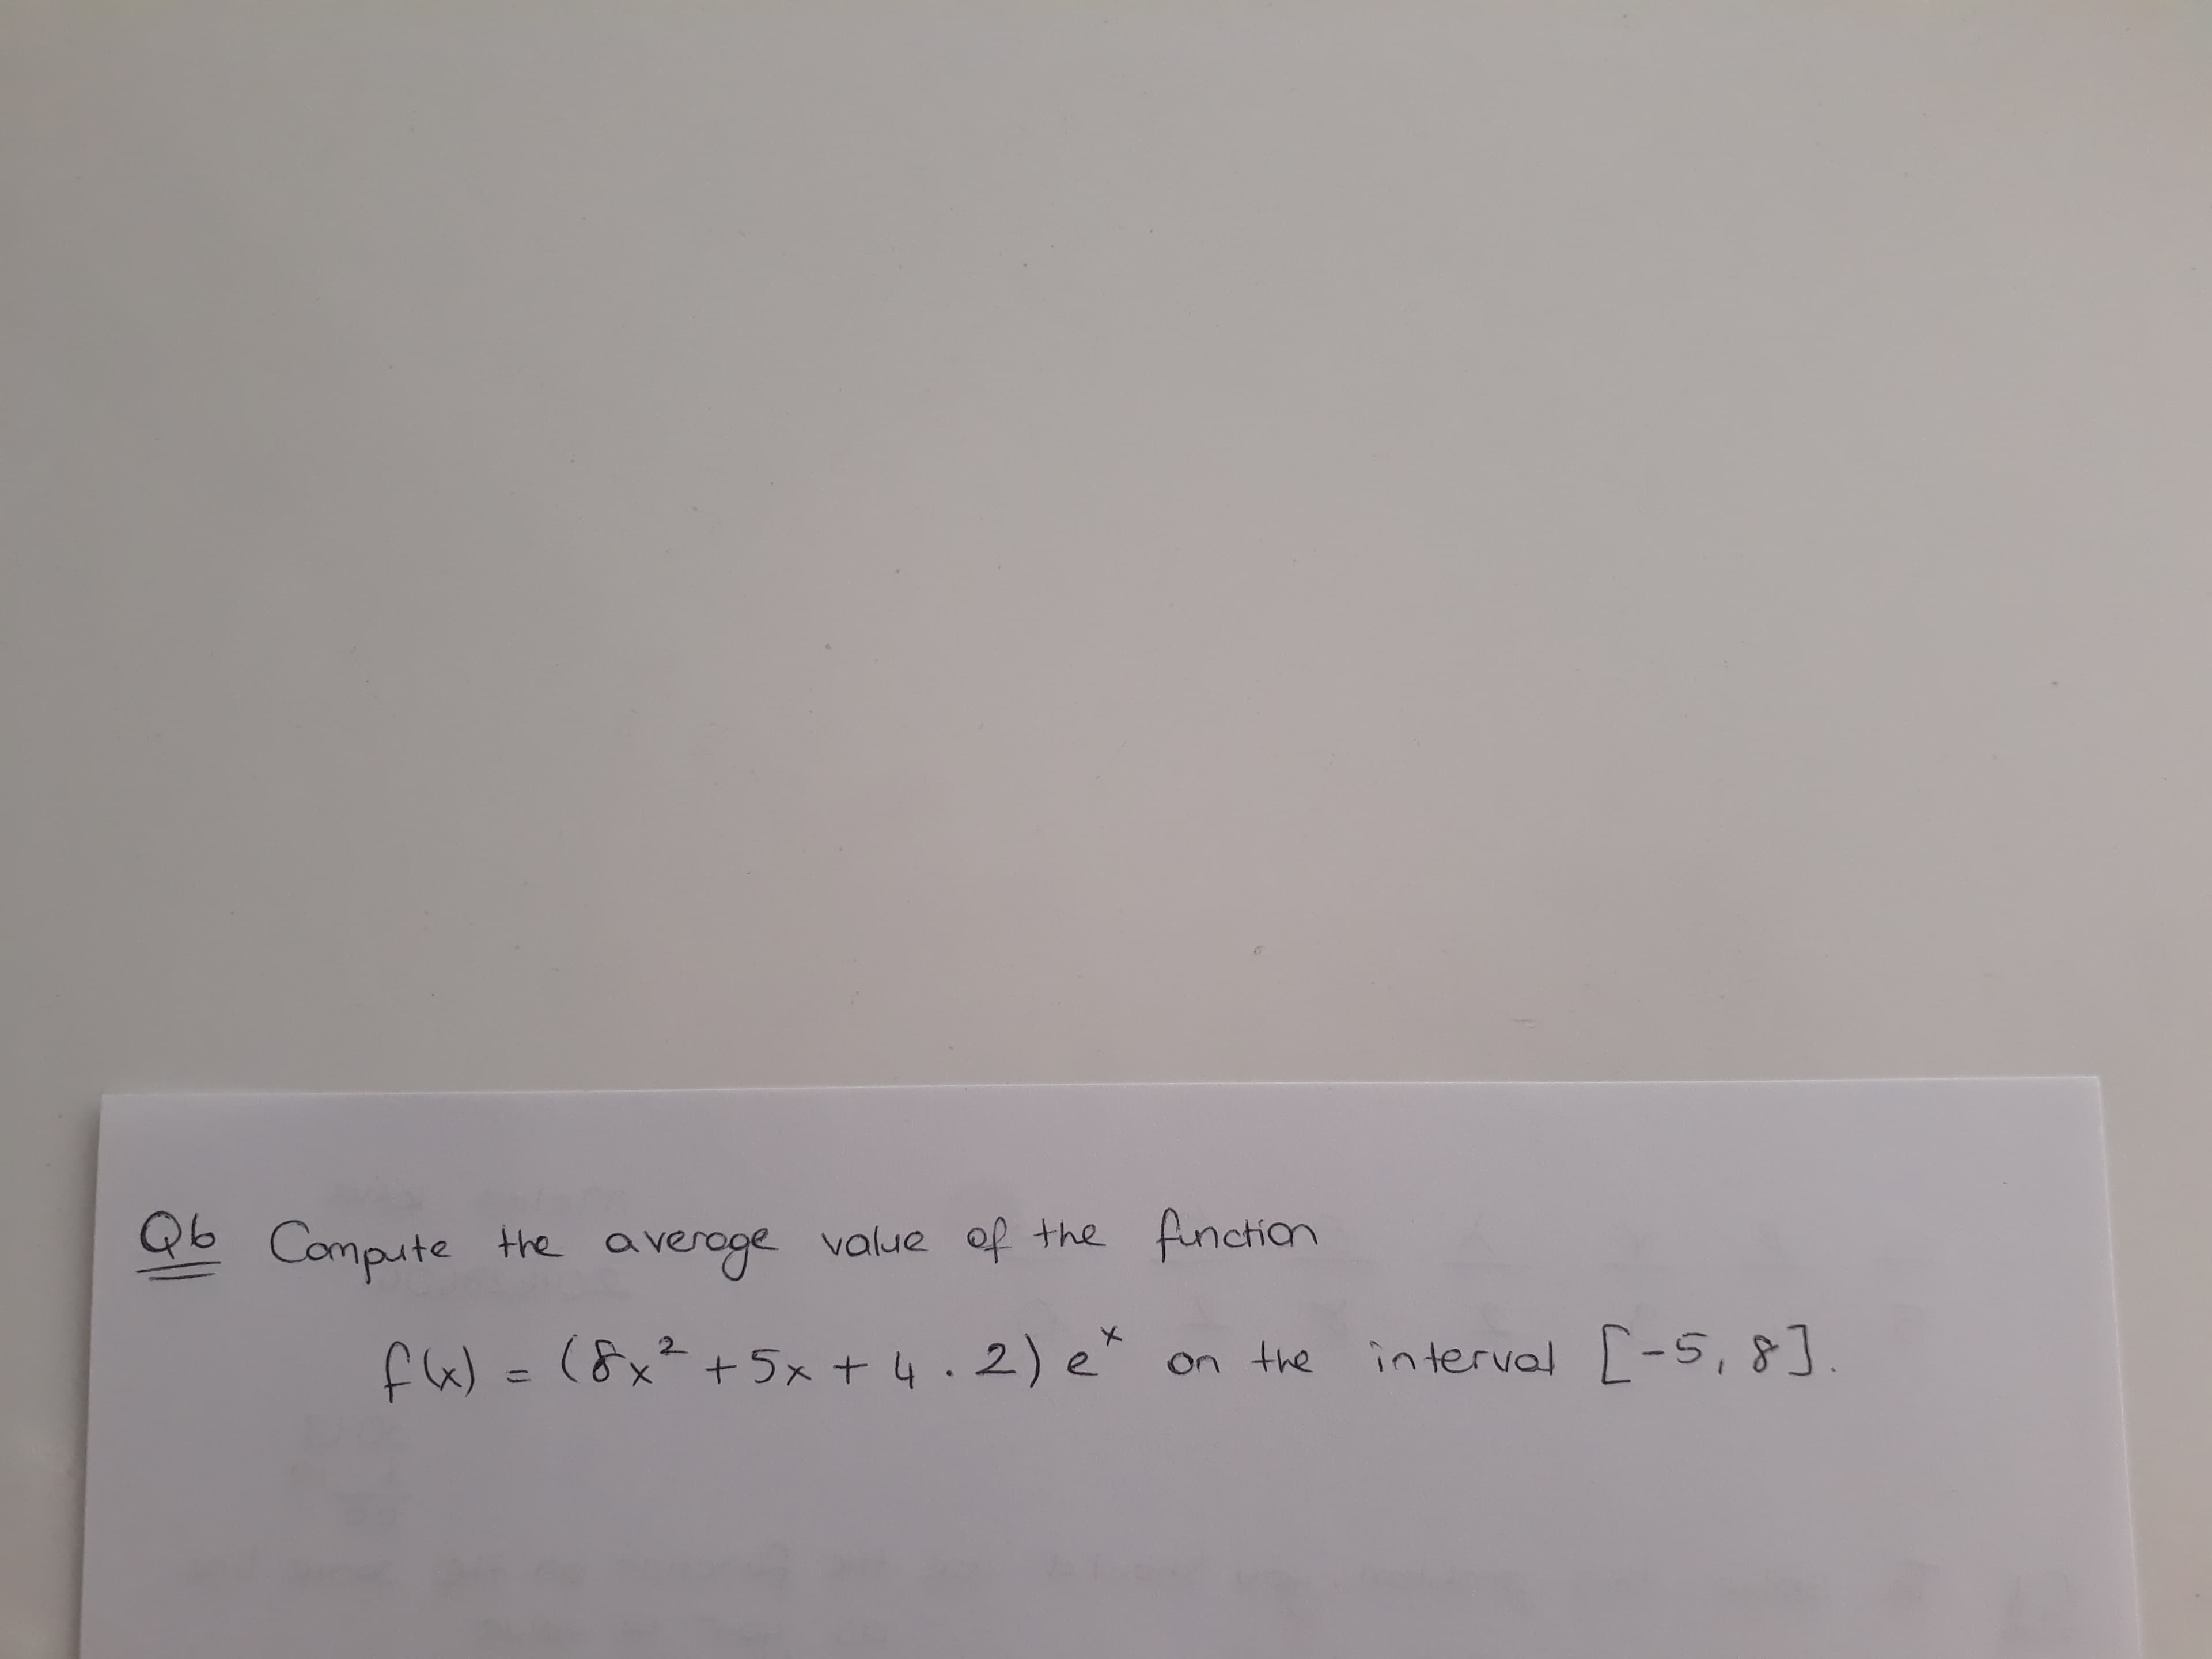 Compute
the a
veroge value of the function
f6) =(8x²+5x + 4.2) e
On the
in terval -S,8].
